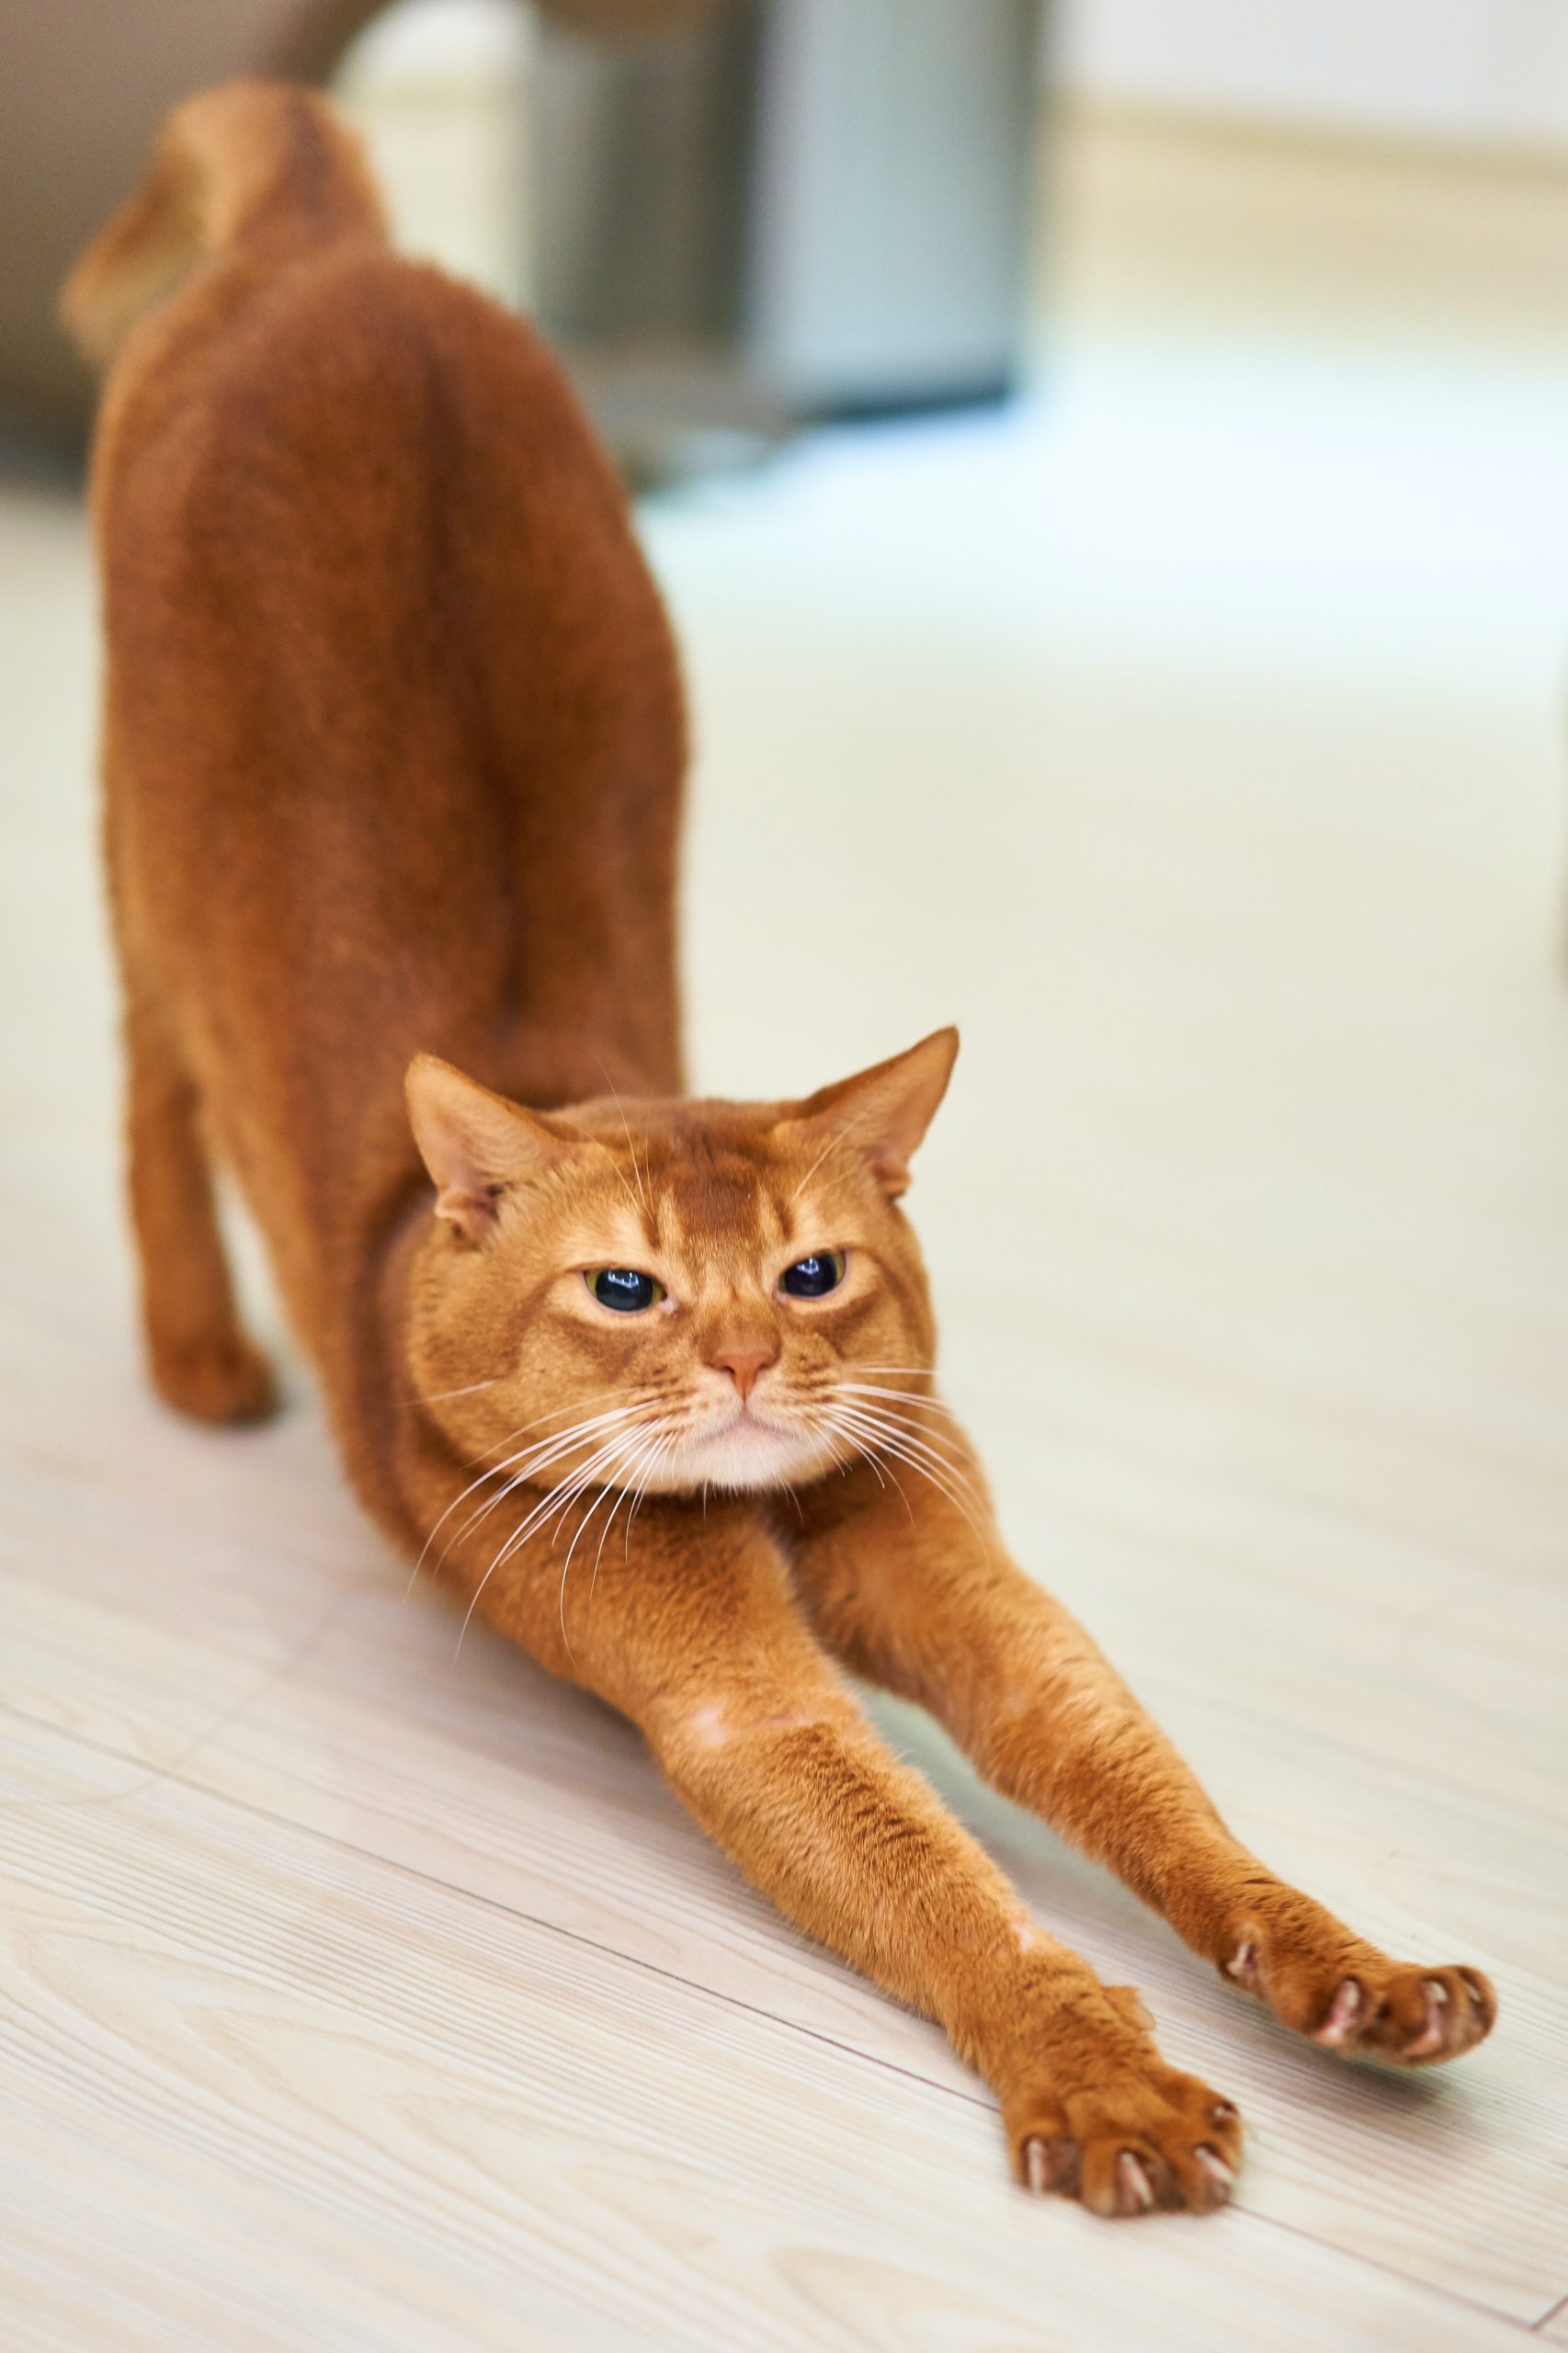 A ginger cat stretches out